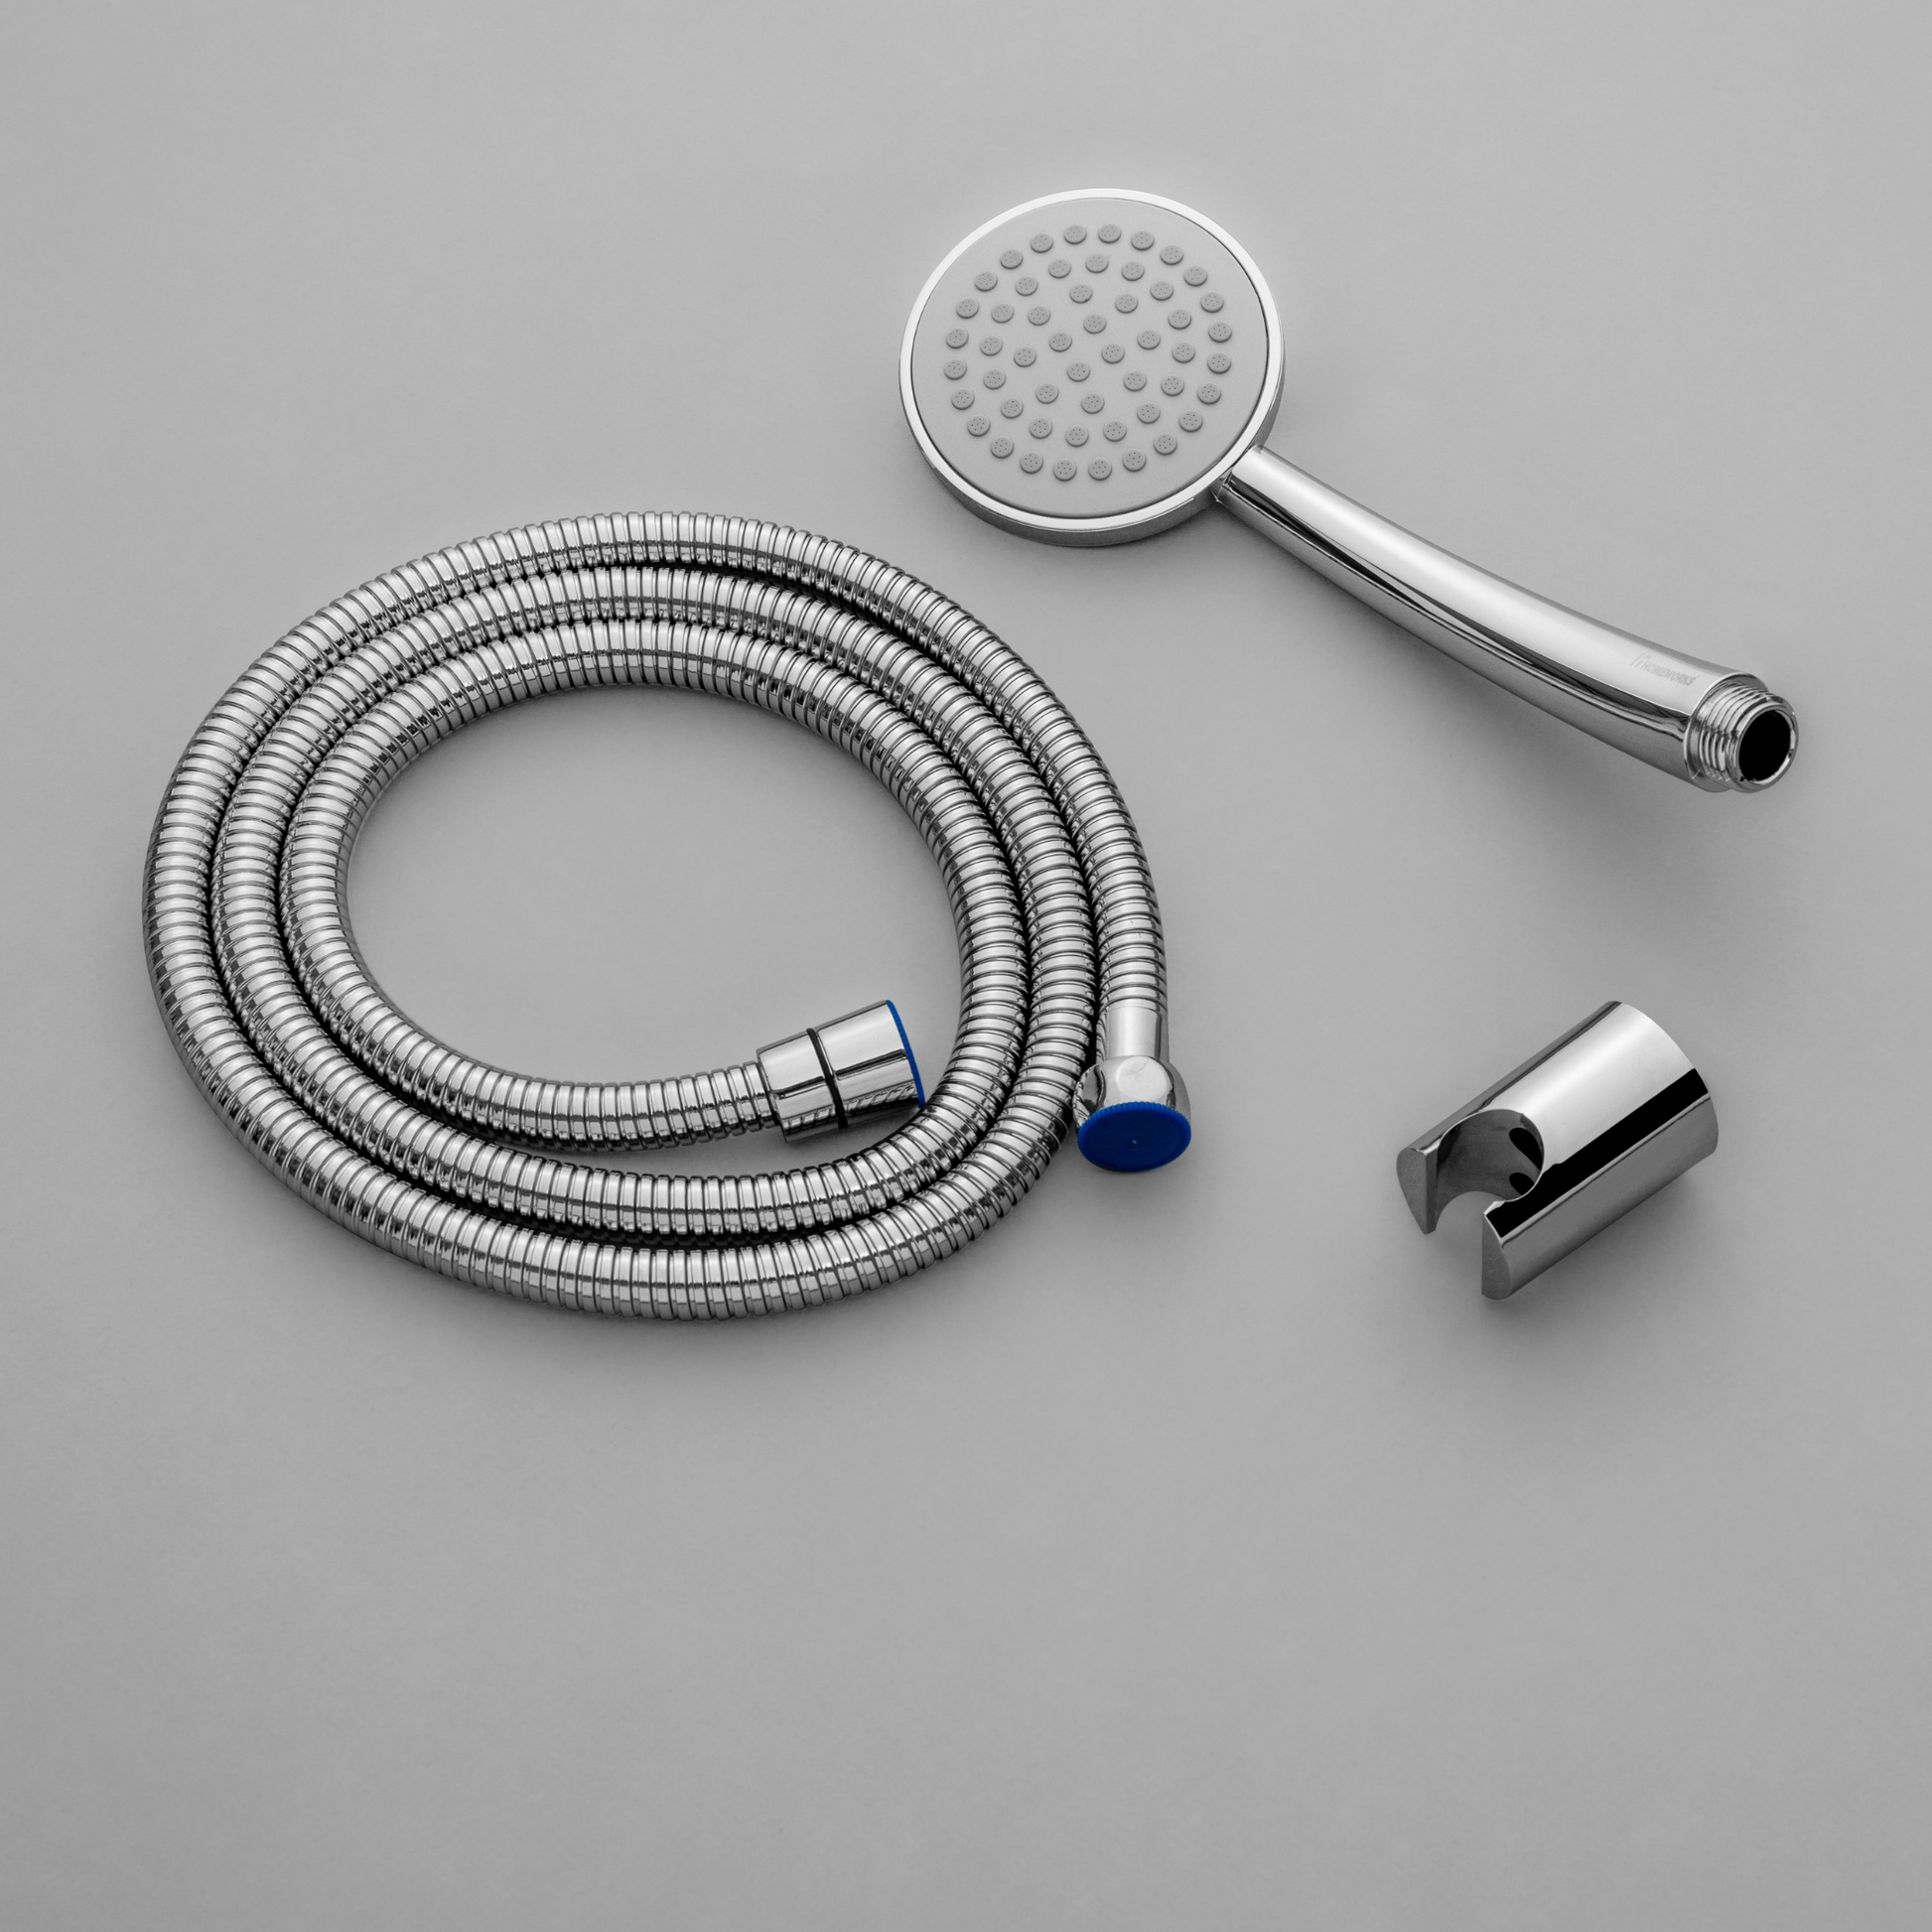 TELEPHONE SHOWER SET RADO ABS CHROME FINISH WITH 1.5 METER SS PULLOUT SHOWER TUBE AND ABS WALL HOOK